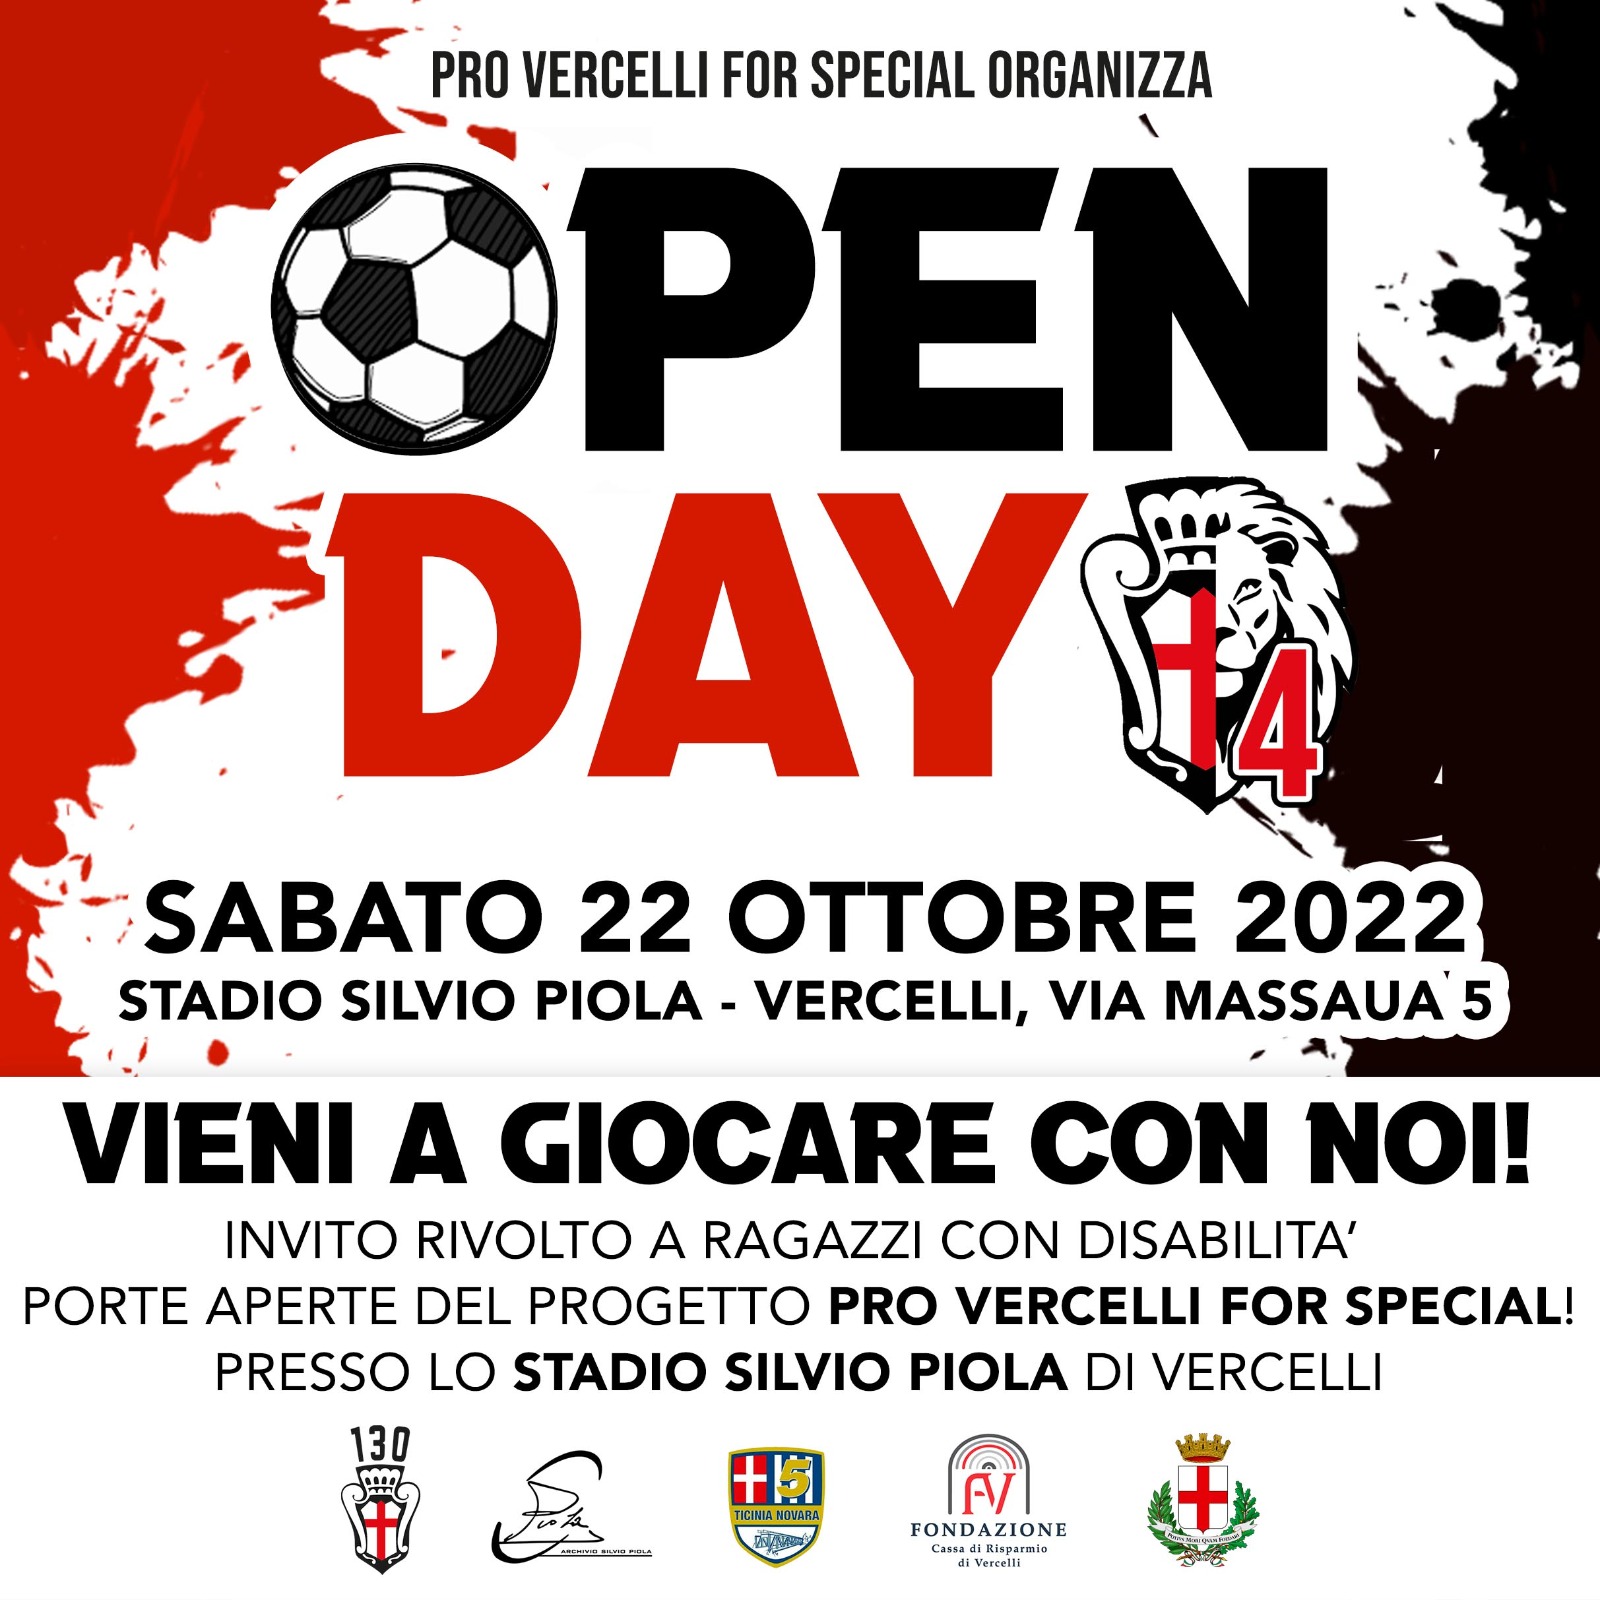 PRO VERCELLI FOR SPECIAL | OPEN DAY